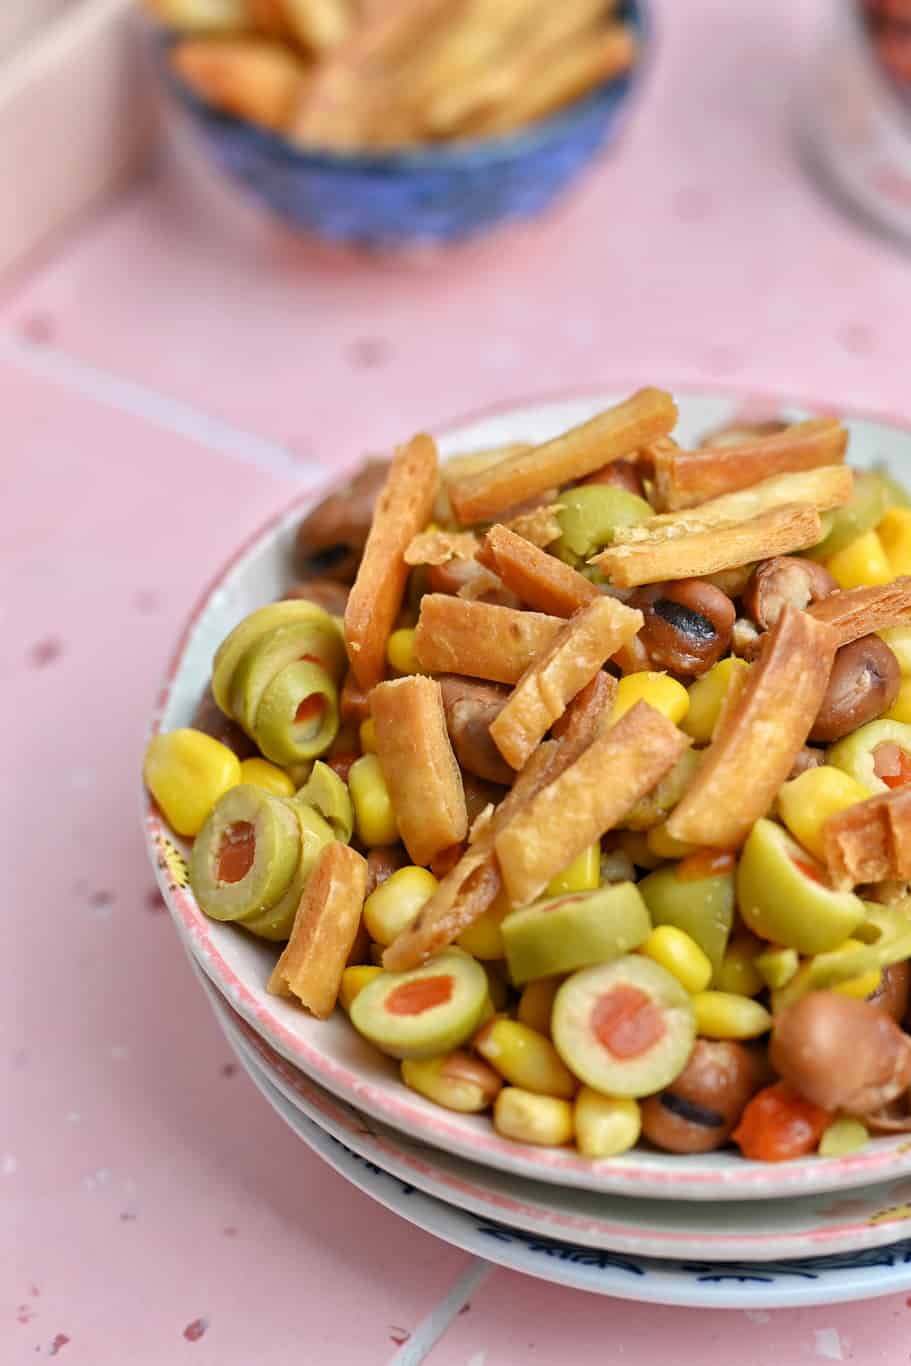 Mediterranean fava bean salad with chopped olives and corn marinated in a tangy dressing